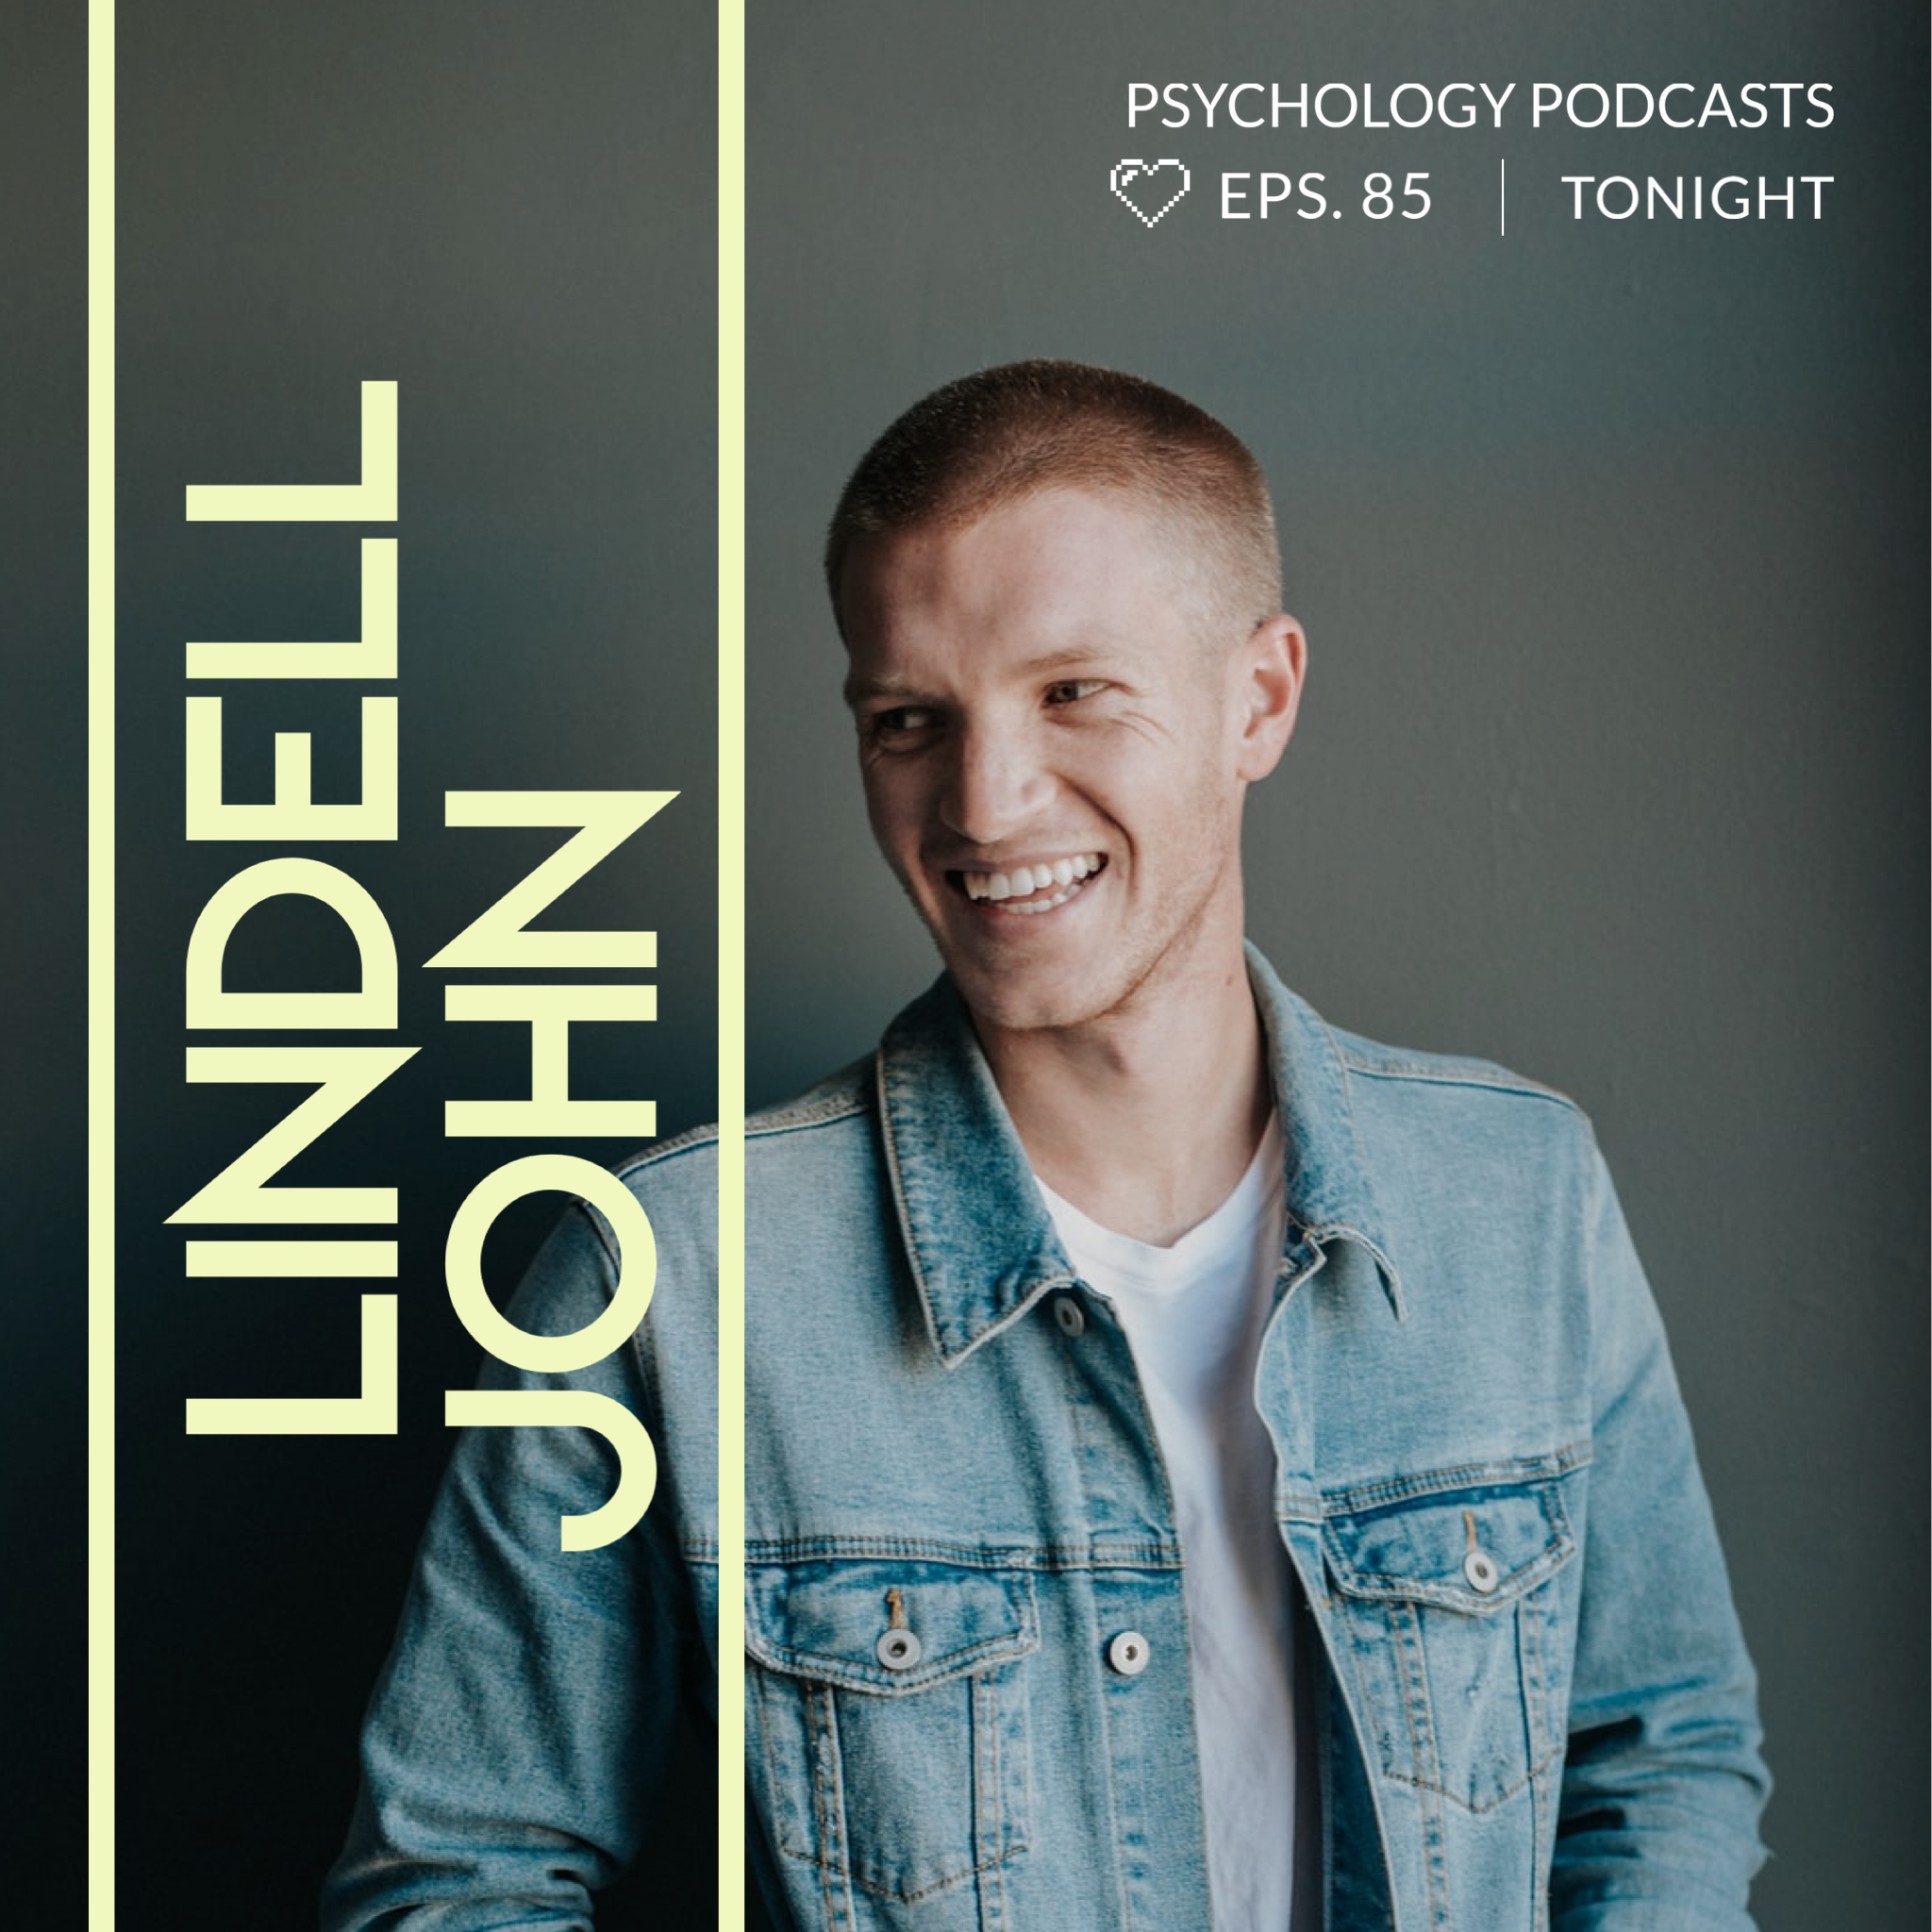 A Man In A Denim Jacket Smiling For The Camera Podcast Template